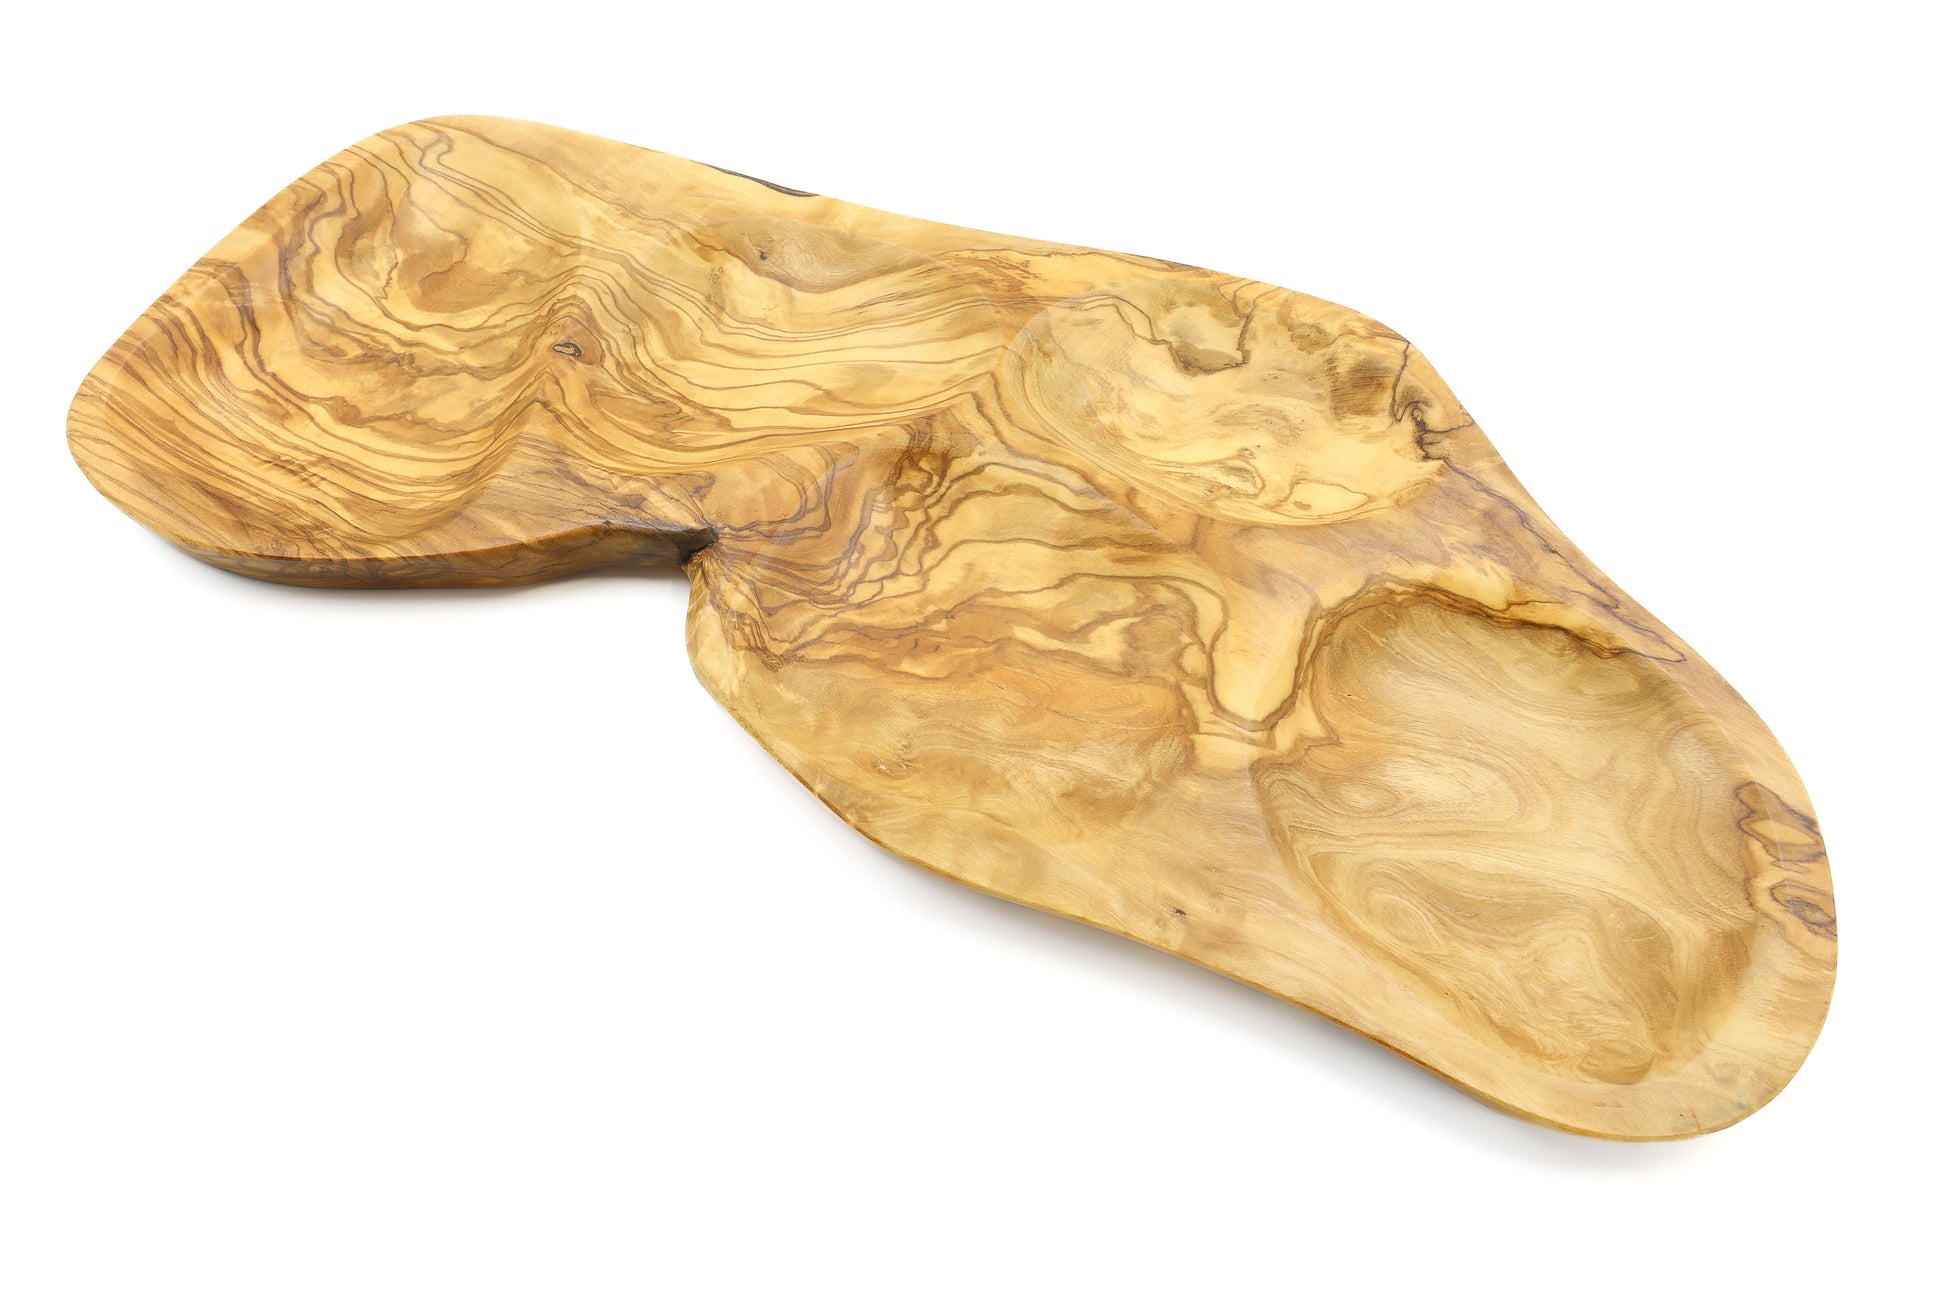 Olive wood sectional tray with an irregular design for your gatherings